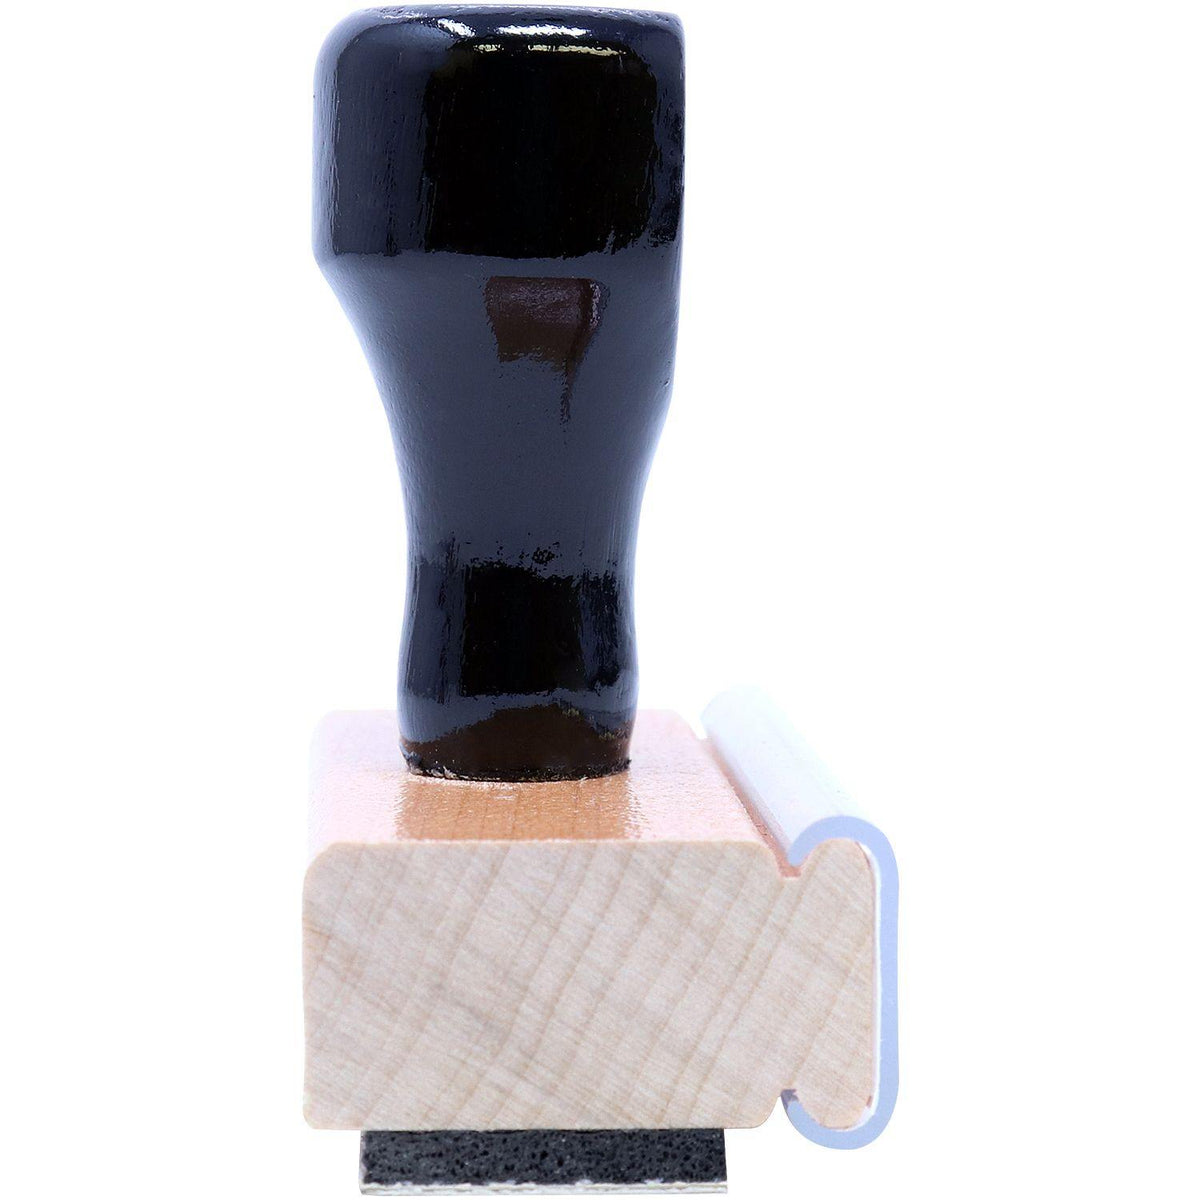 Side View of Large Paid with Ck No Stamp Rubber Stamp